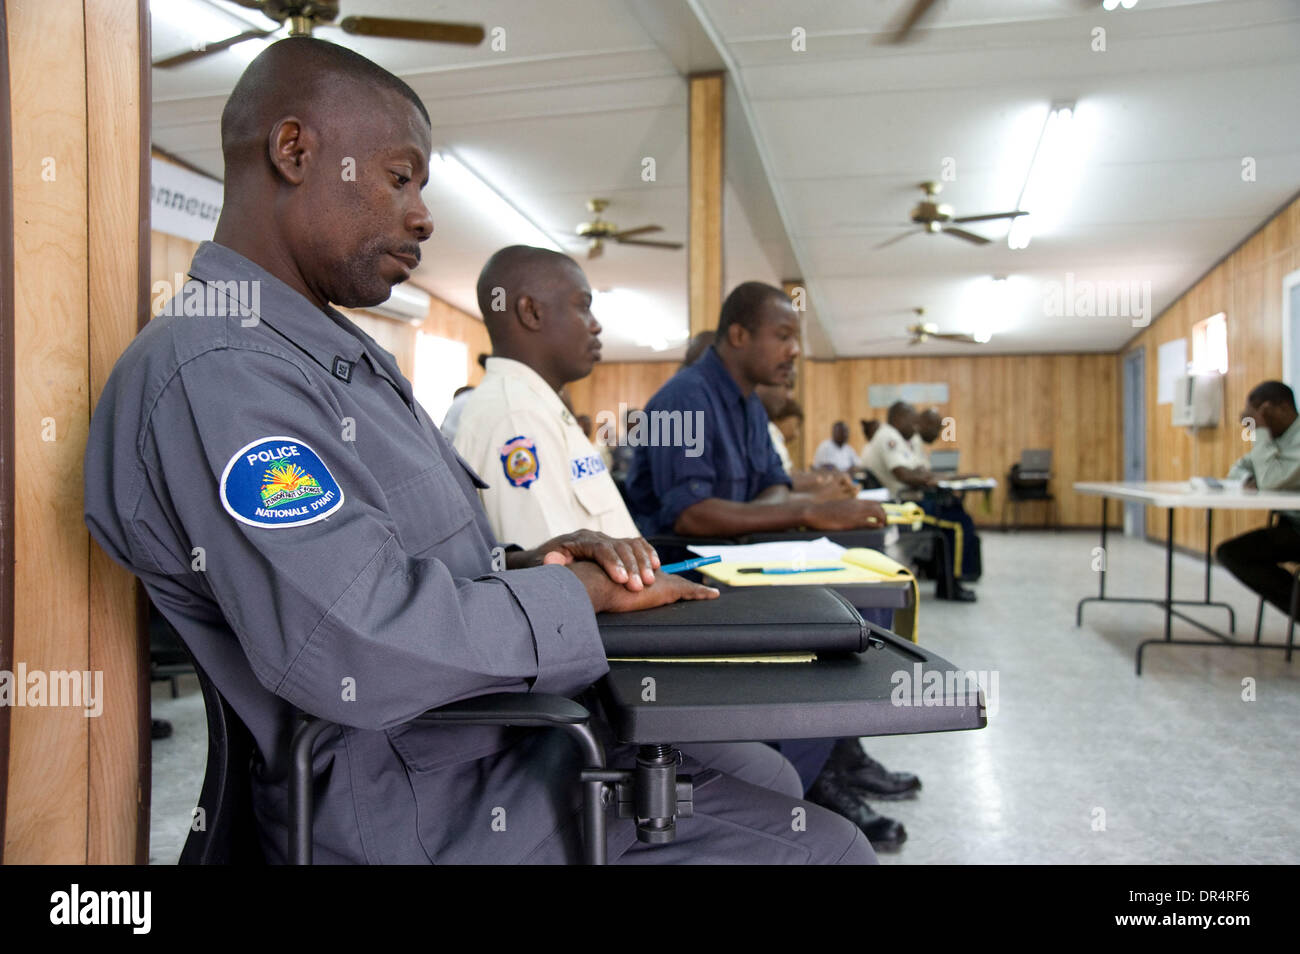 Apr 30, 2009 - Port au Prince, Haiti - Police officers attend advanced classes at the Haitian National Police Academy in Port au Prince, Haiti. These officers are being trained for specialist roles within the existing national police force (Credit Image: © David Snyder/ZUMA Press) Stock Photo